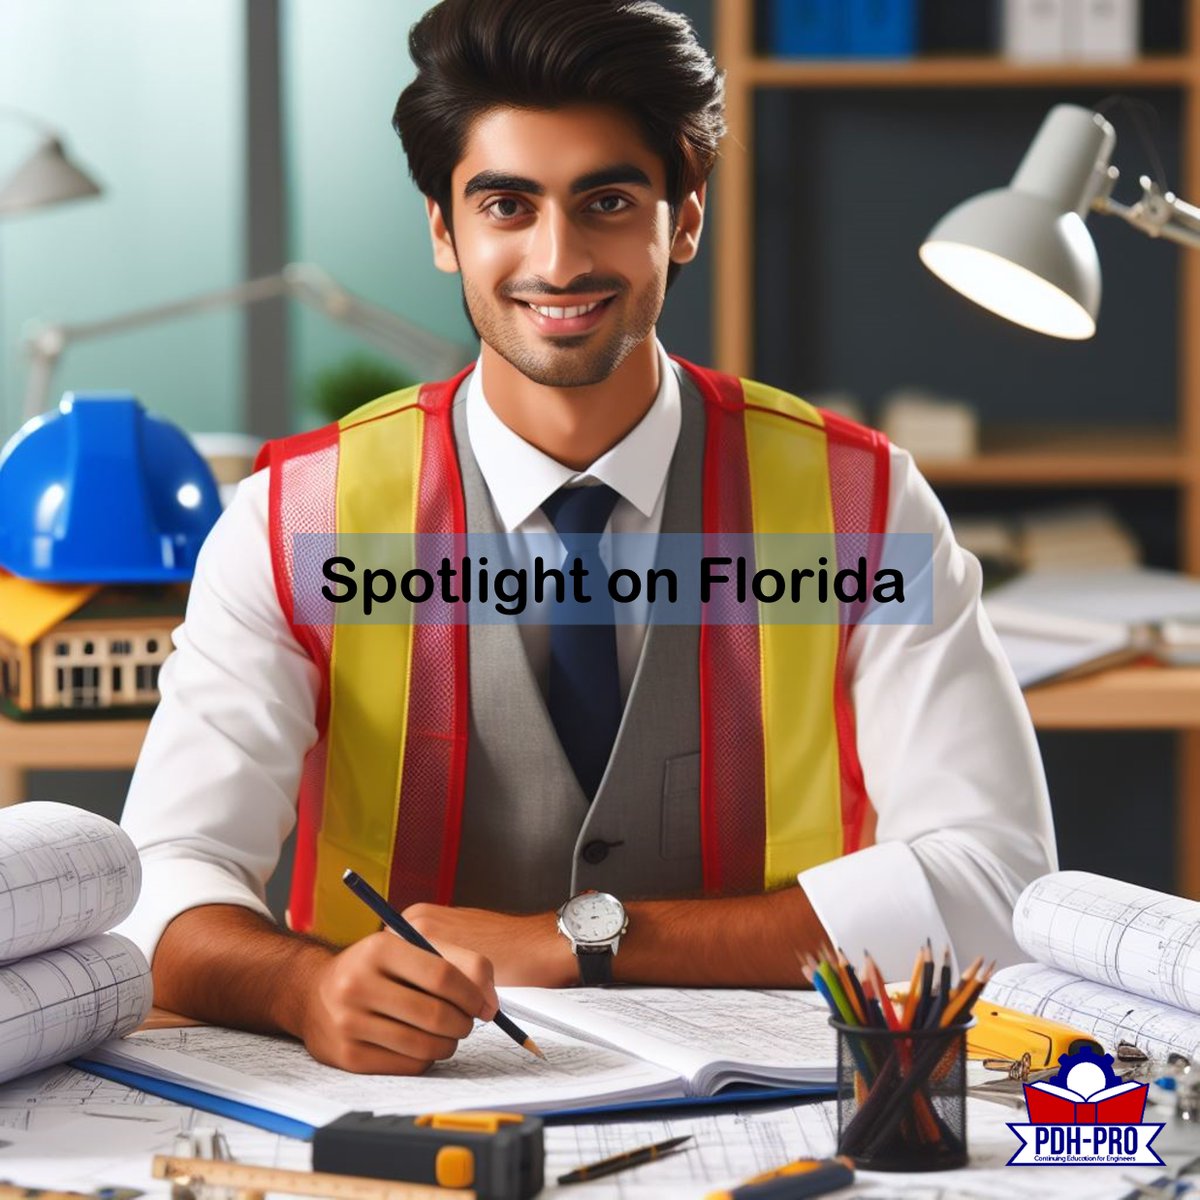 Navigating CE requirements in Florida? We've got you covered with the latest updates and tips. #FloridaEngineers #ContinuingEducation
pdh-pro.com/pe-resources/c…